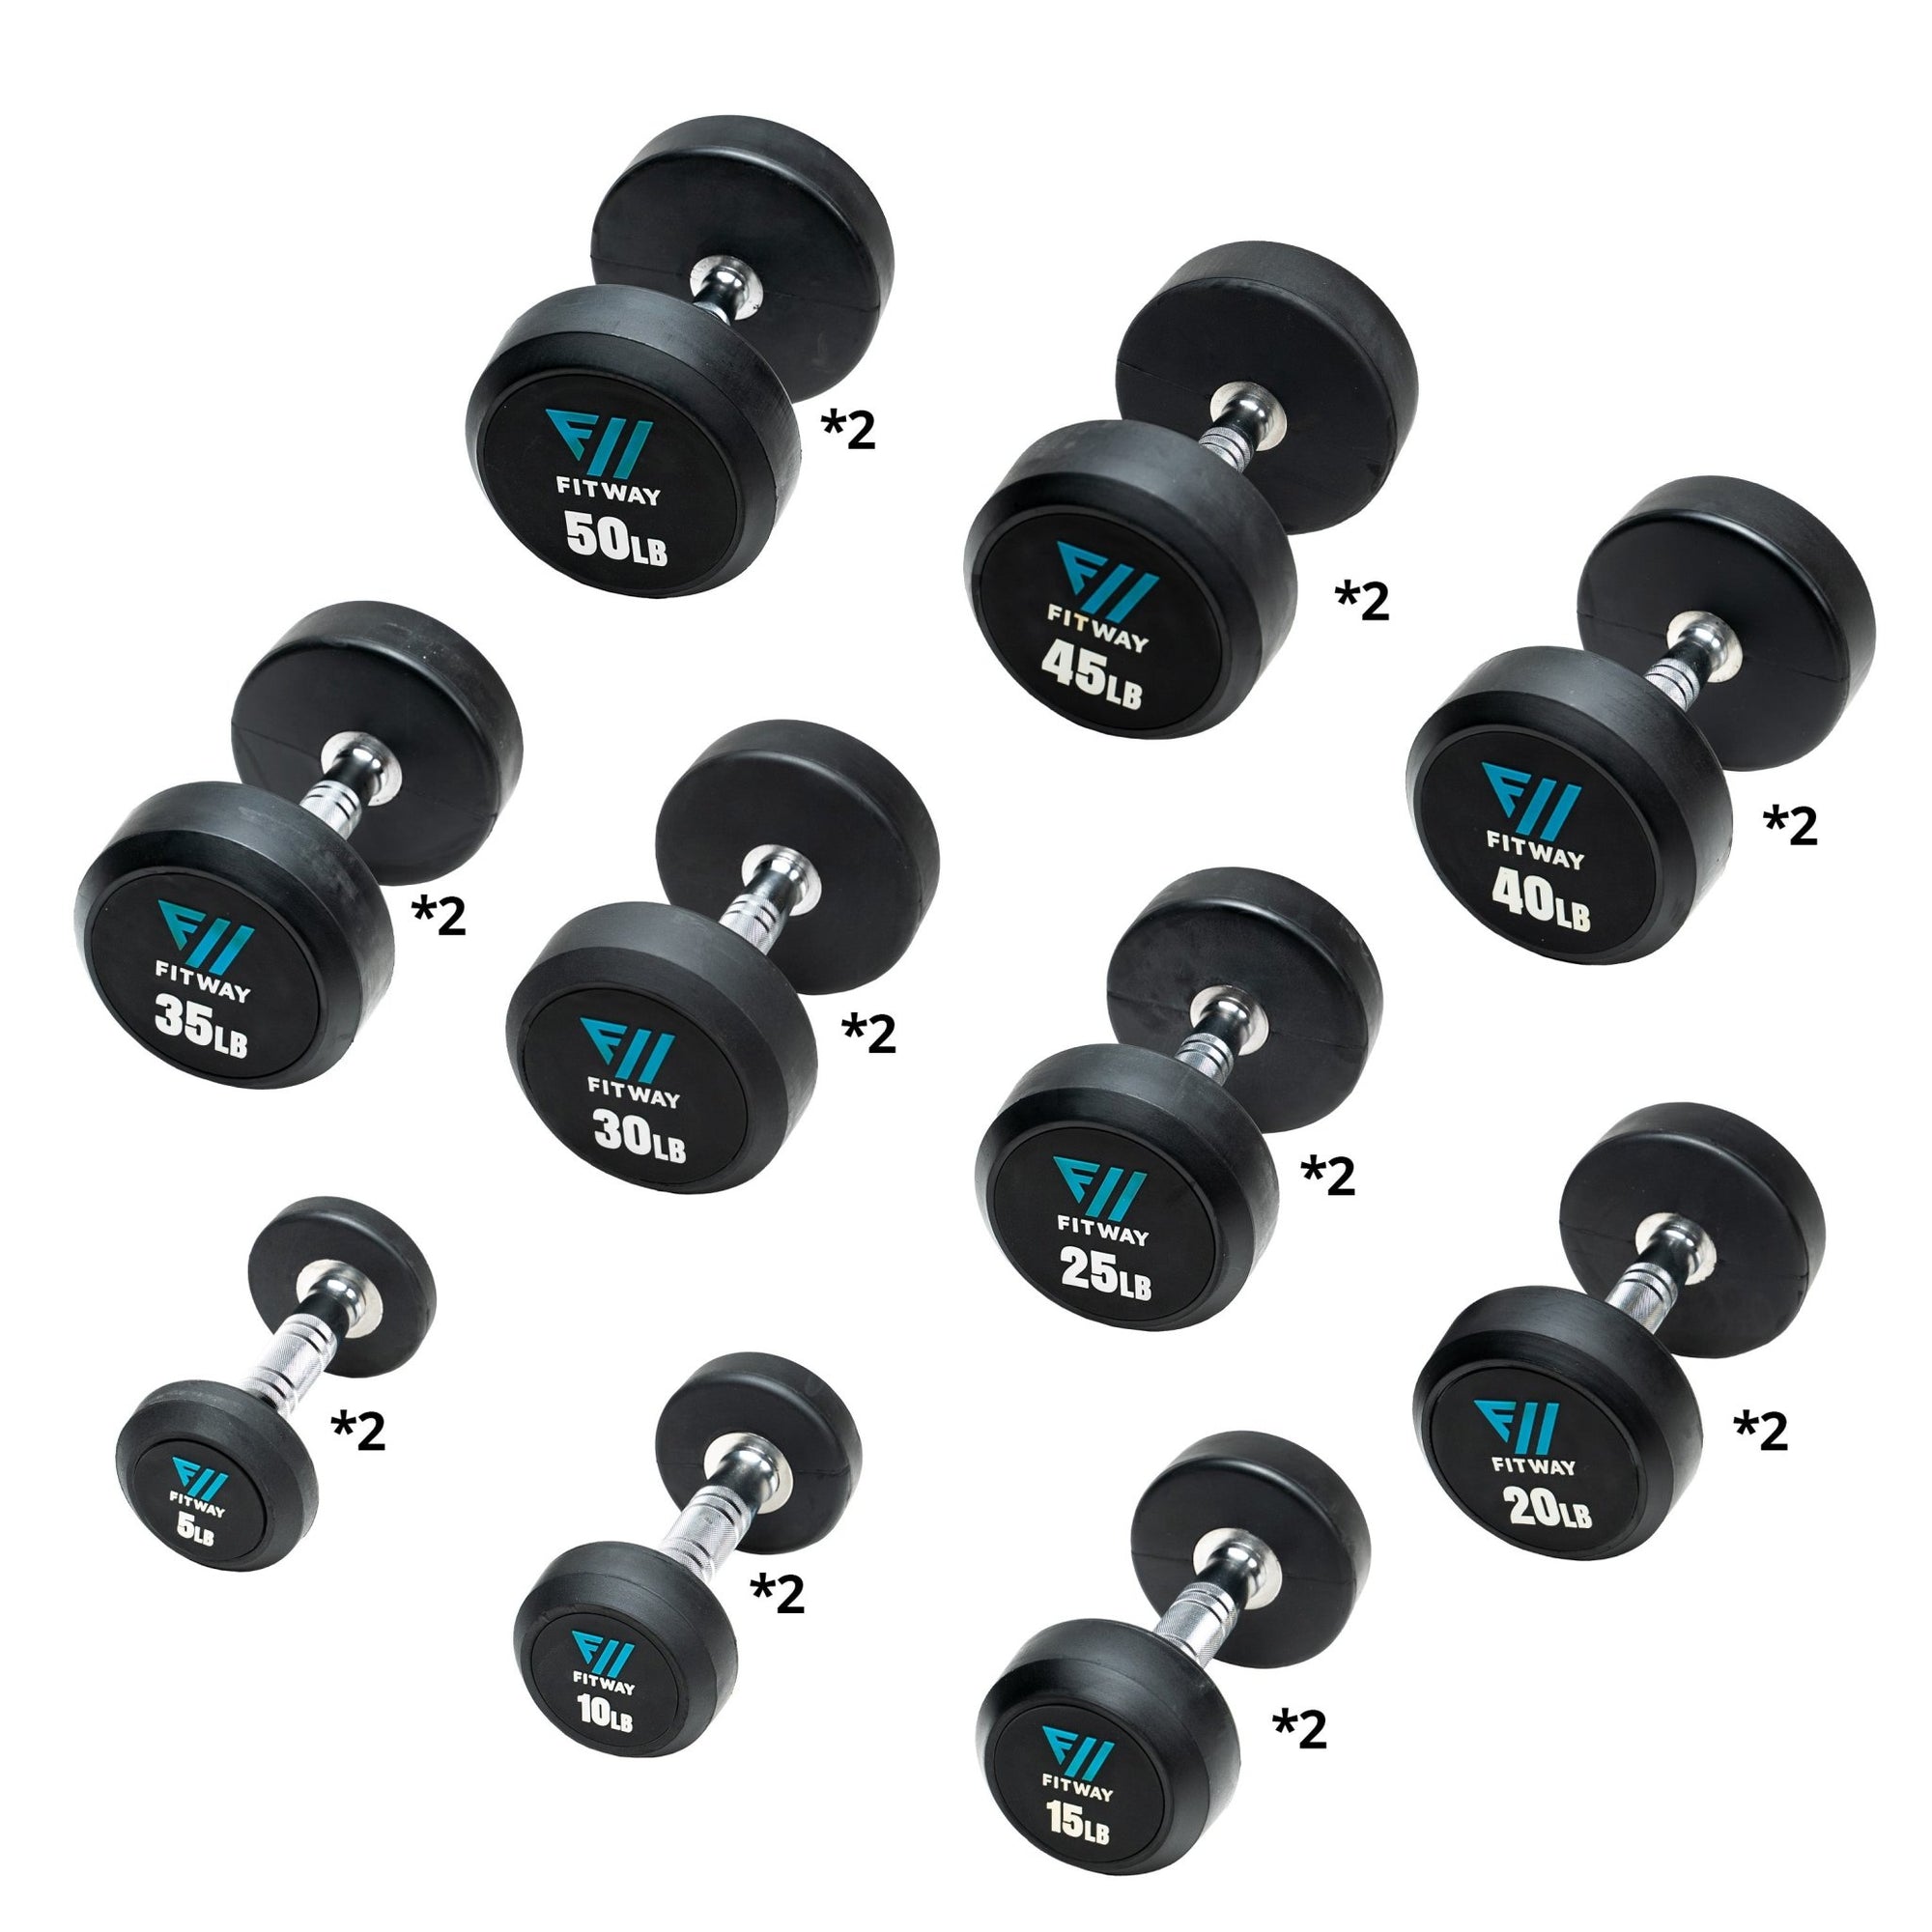 Rubber Home Gym Combo Set with Weight Plates for Workout, Fitness